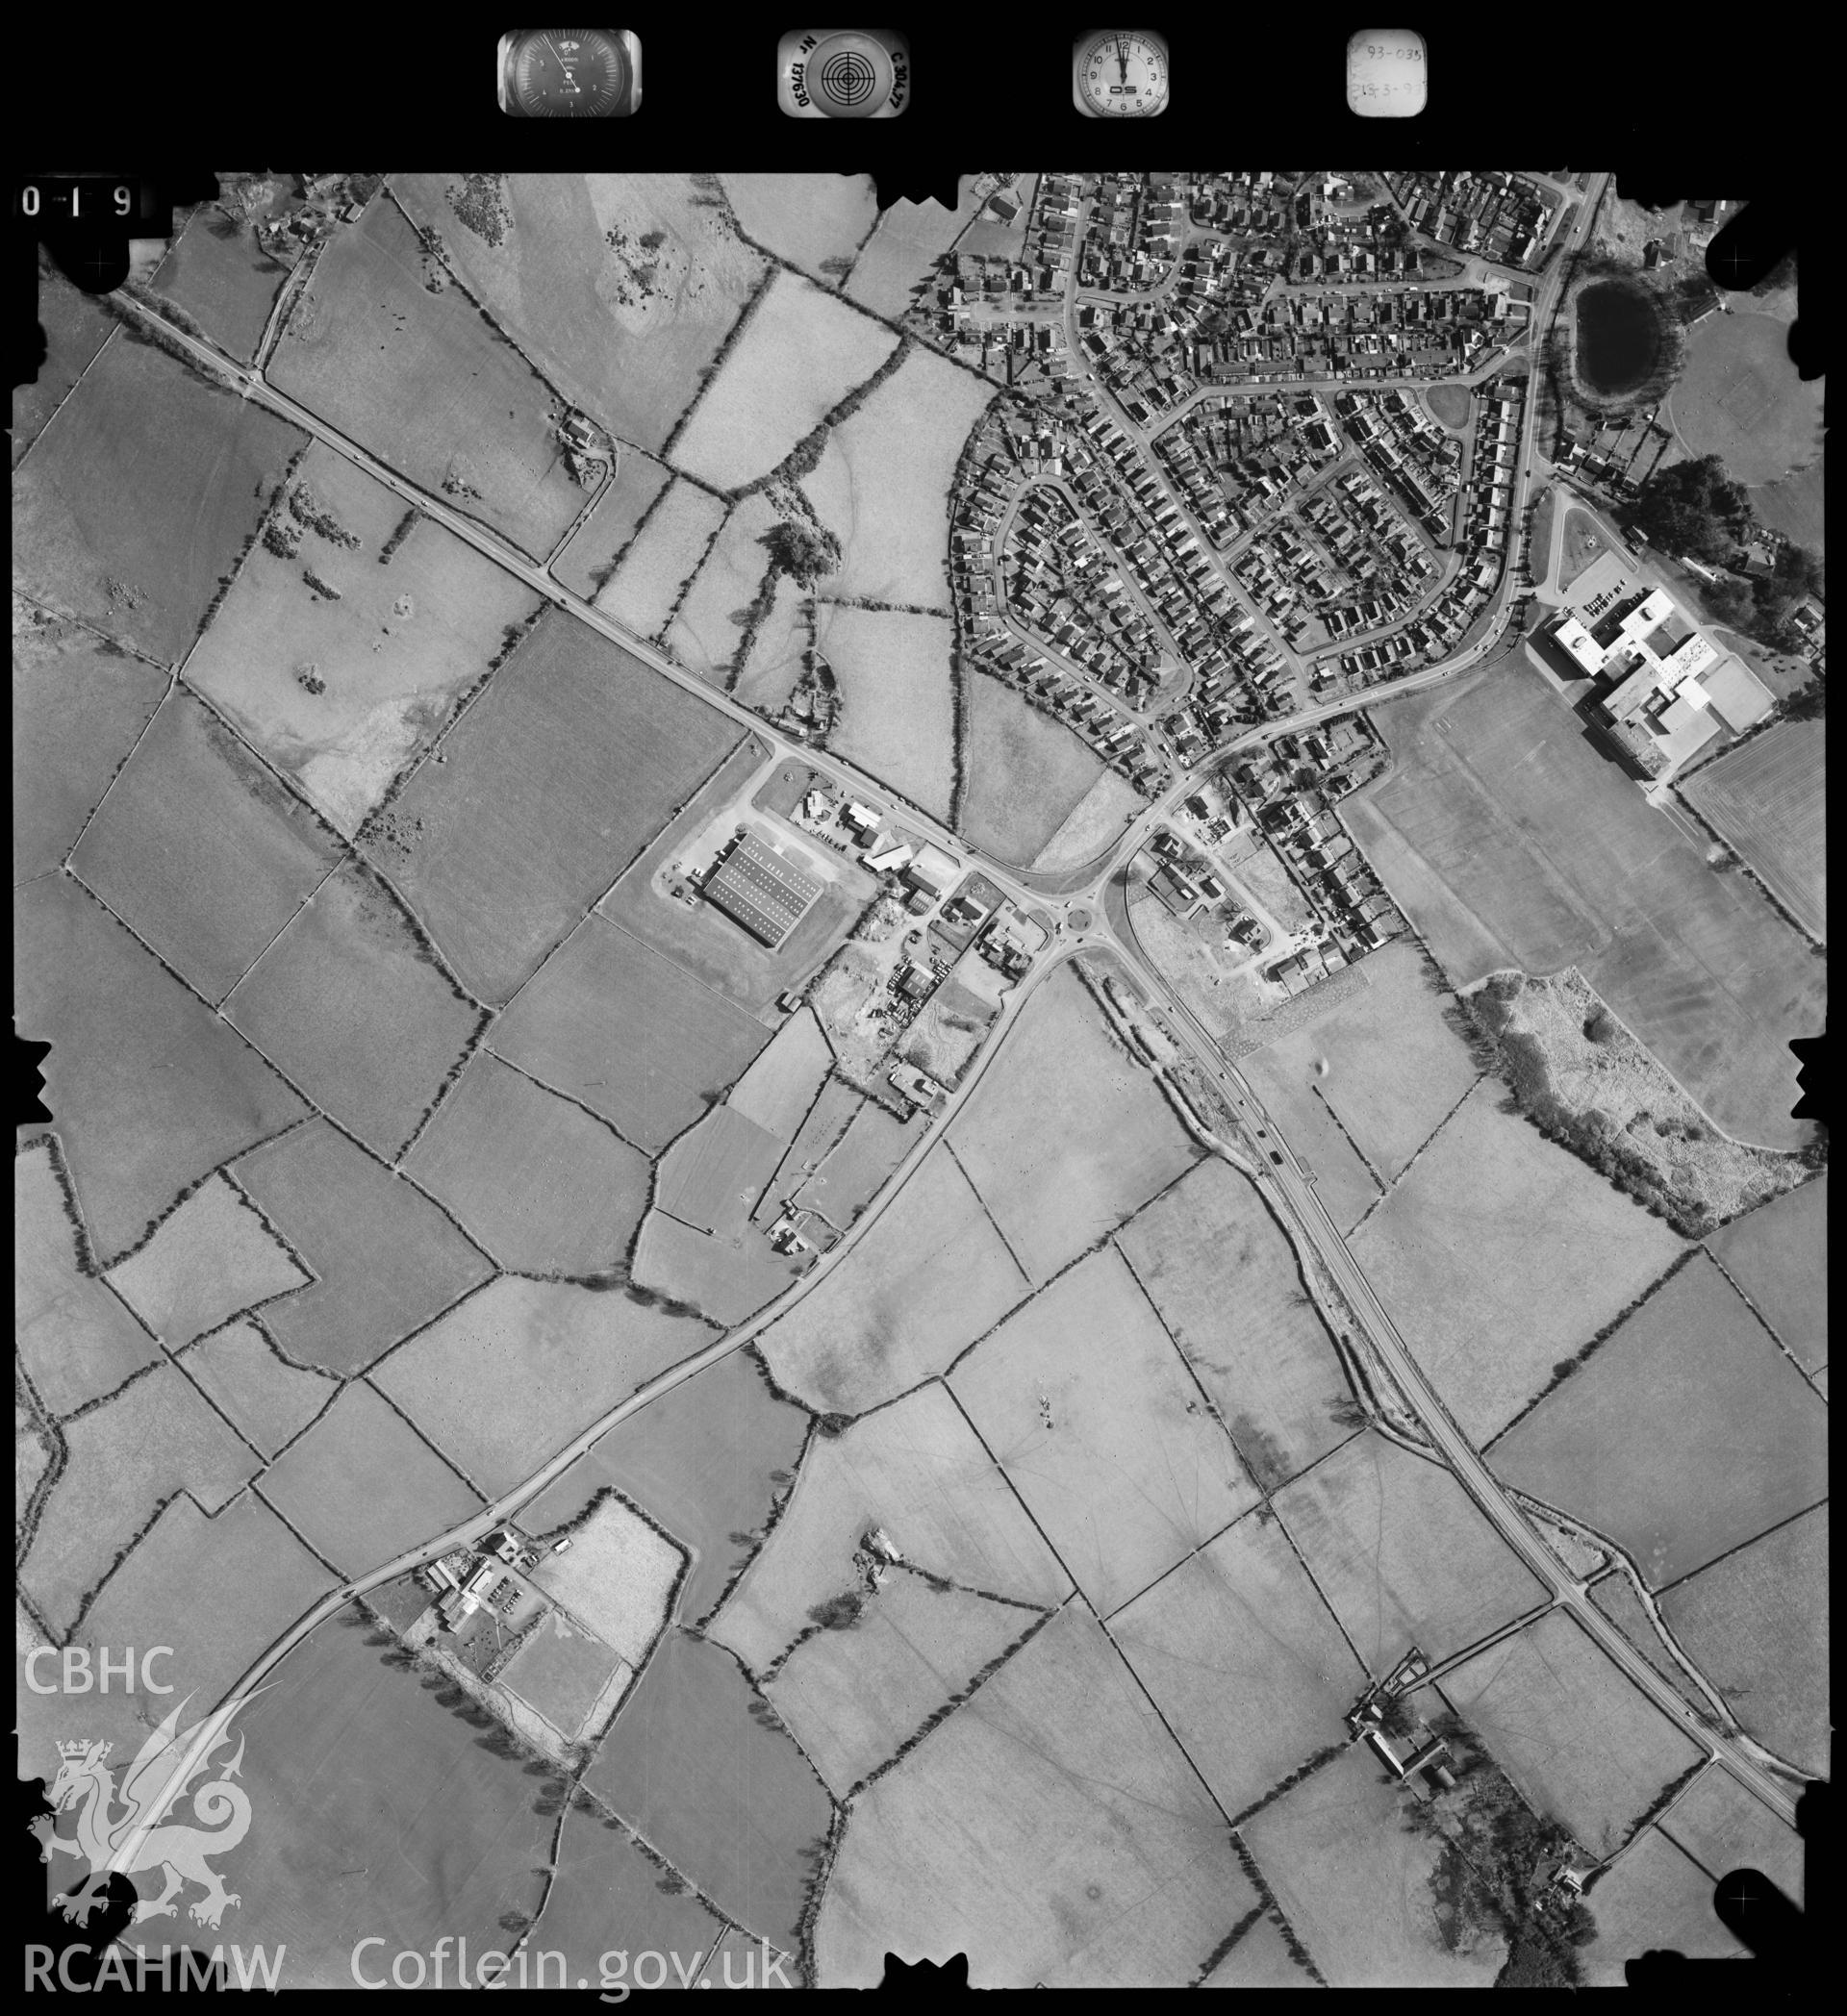 Digitized copy of an aerial photograph showing area to the north of Menai Bridge, taken by Ordnance Survey, 1995.